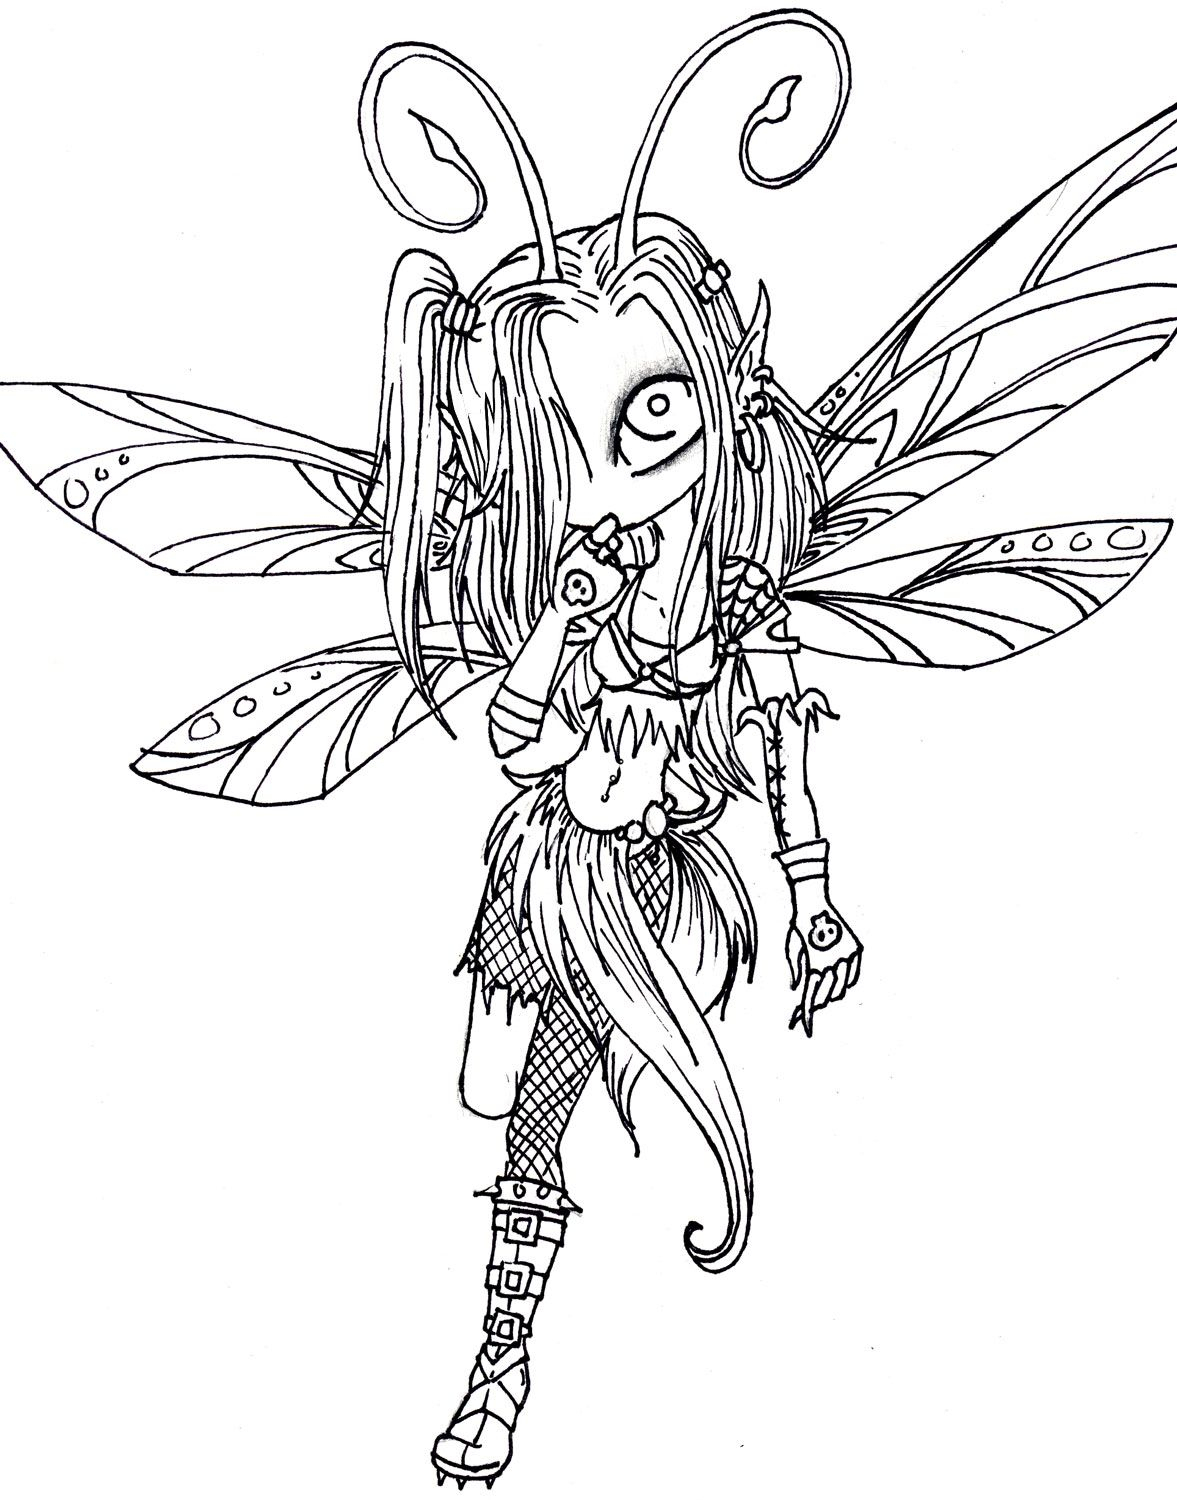 Pinjenjen S. On Art Patterns | Pinterest | Coloring Pages, Adult - Free Printable Coloring Pages For Adults Dark Fairies